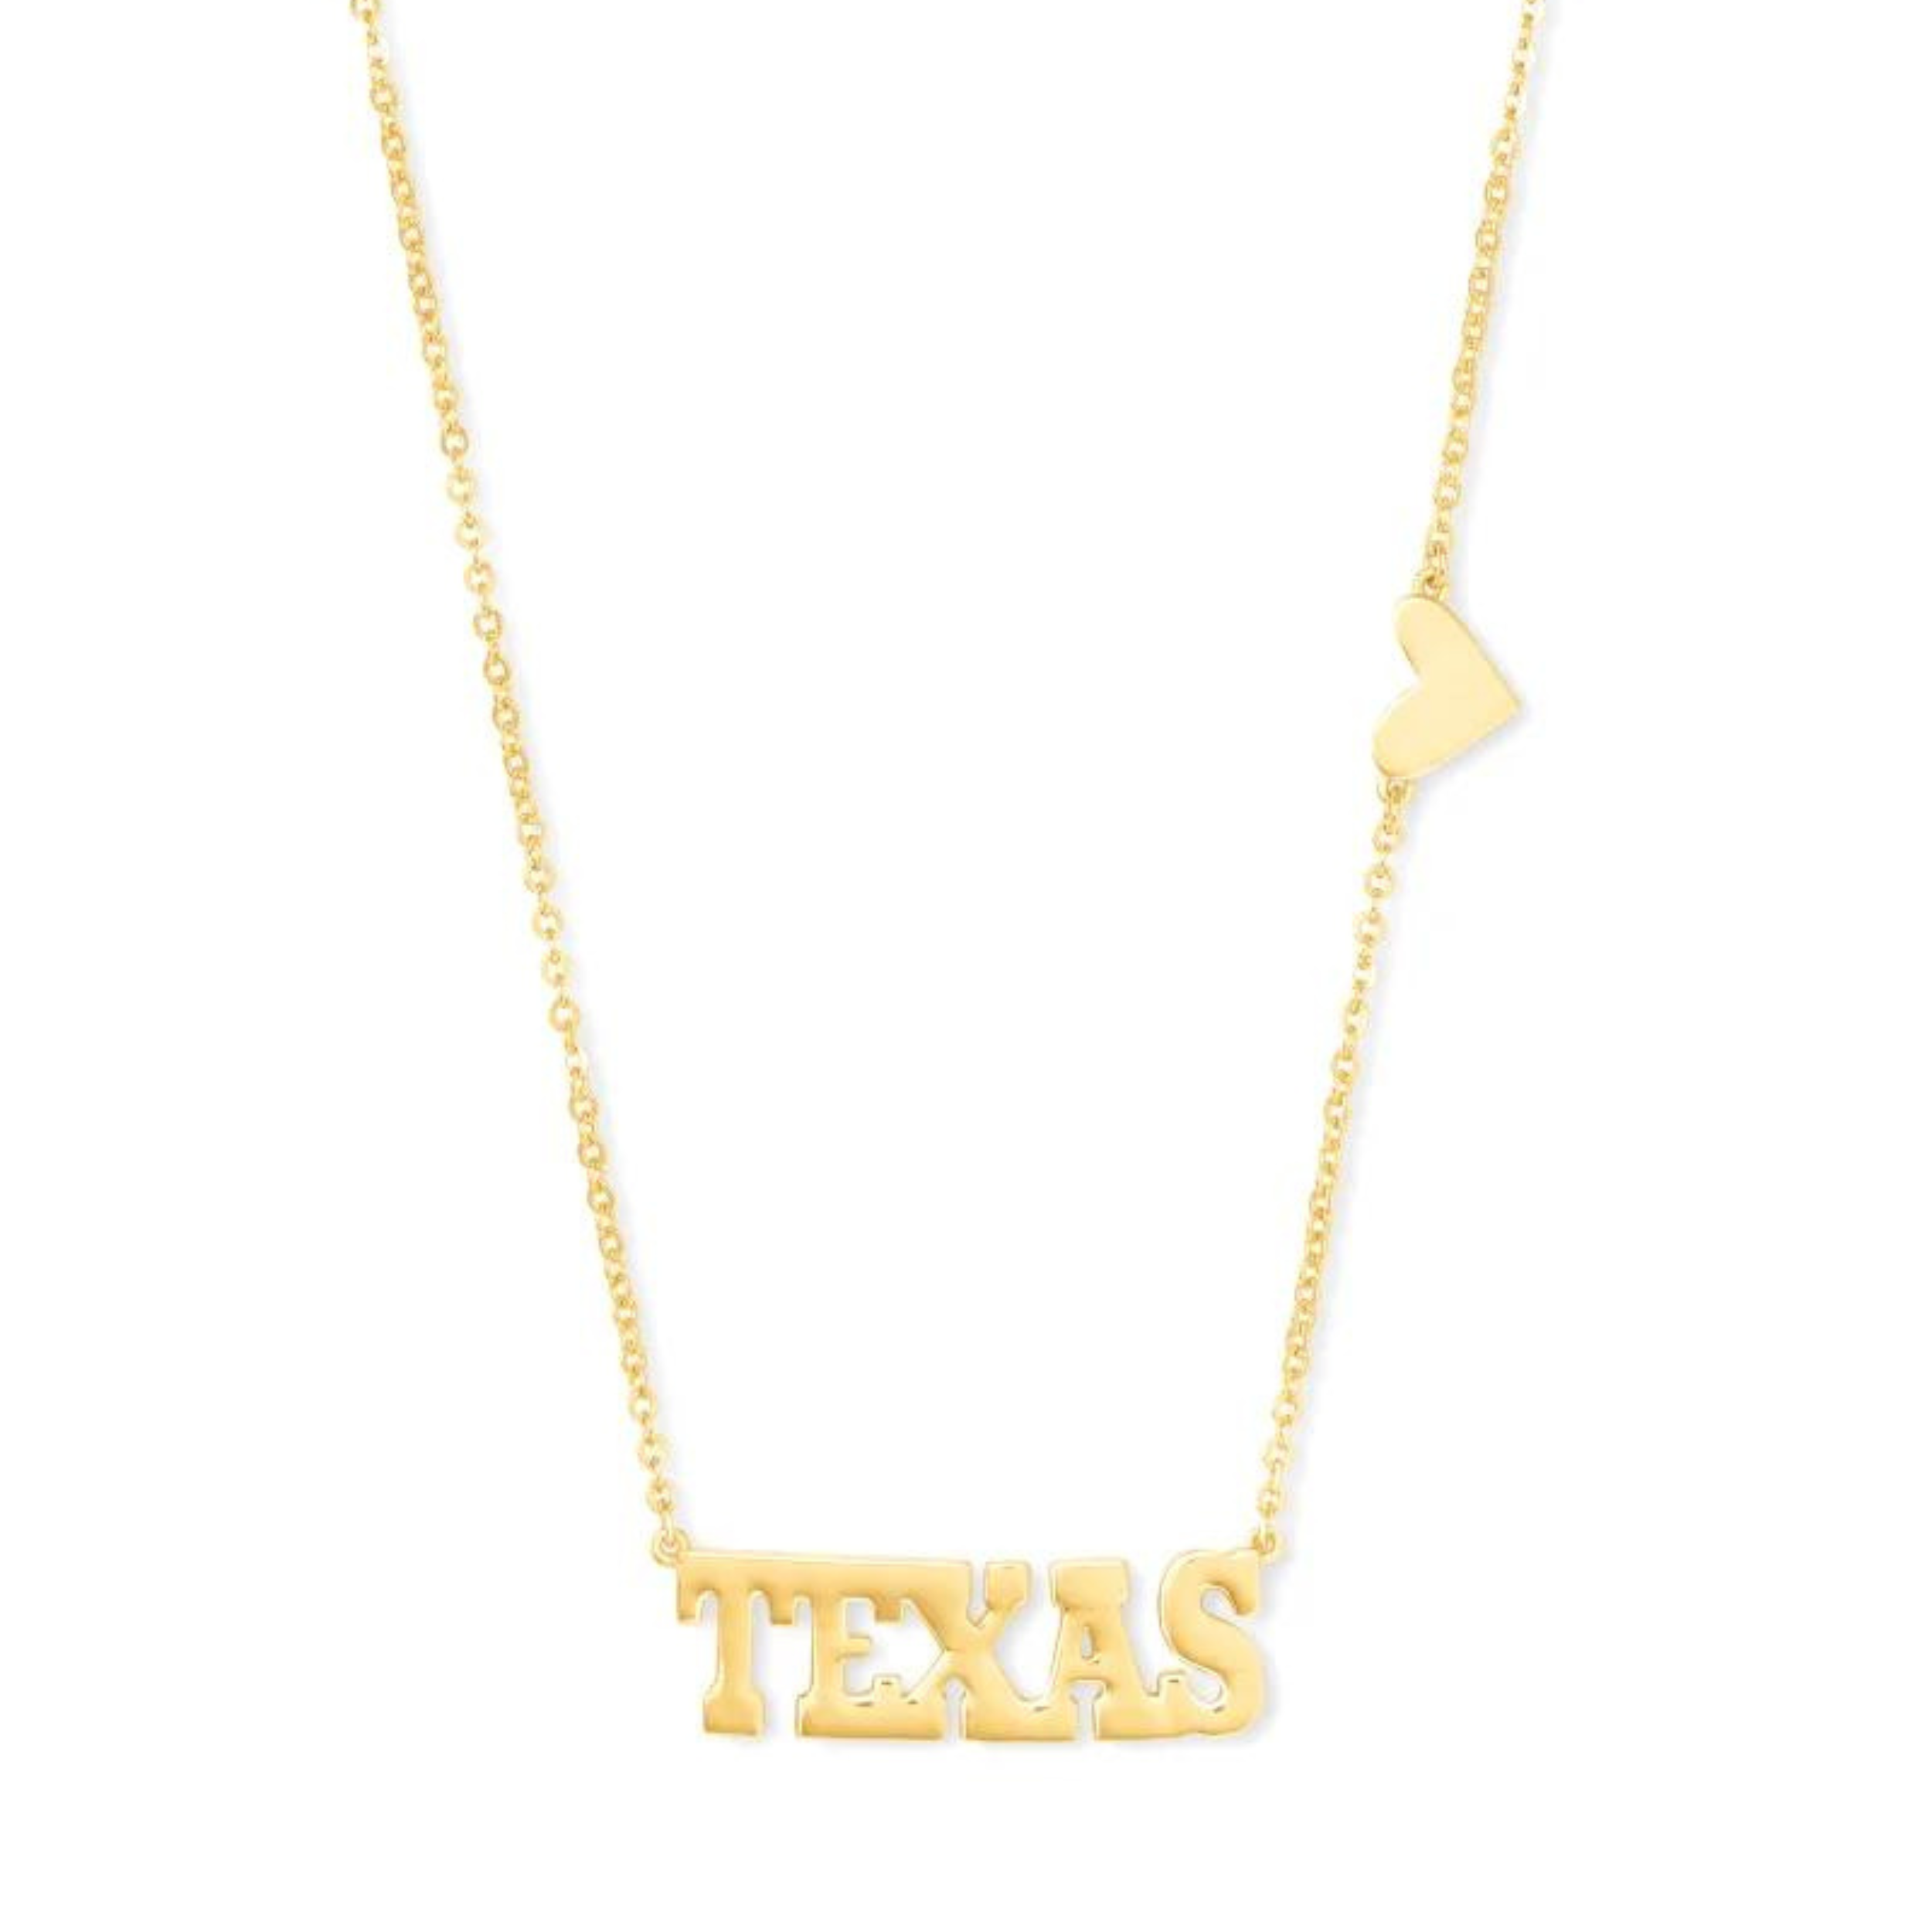 Gold chain necklace with the word texas and a heart, pictured on a white background.